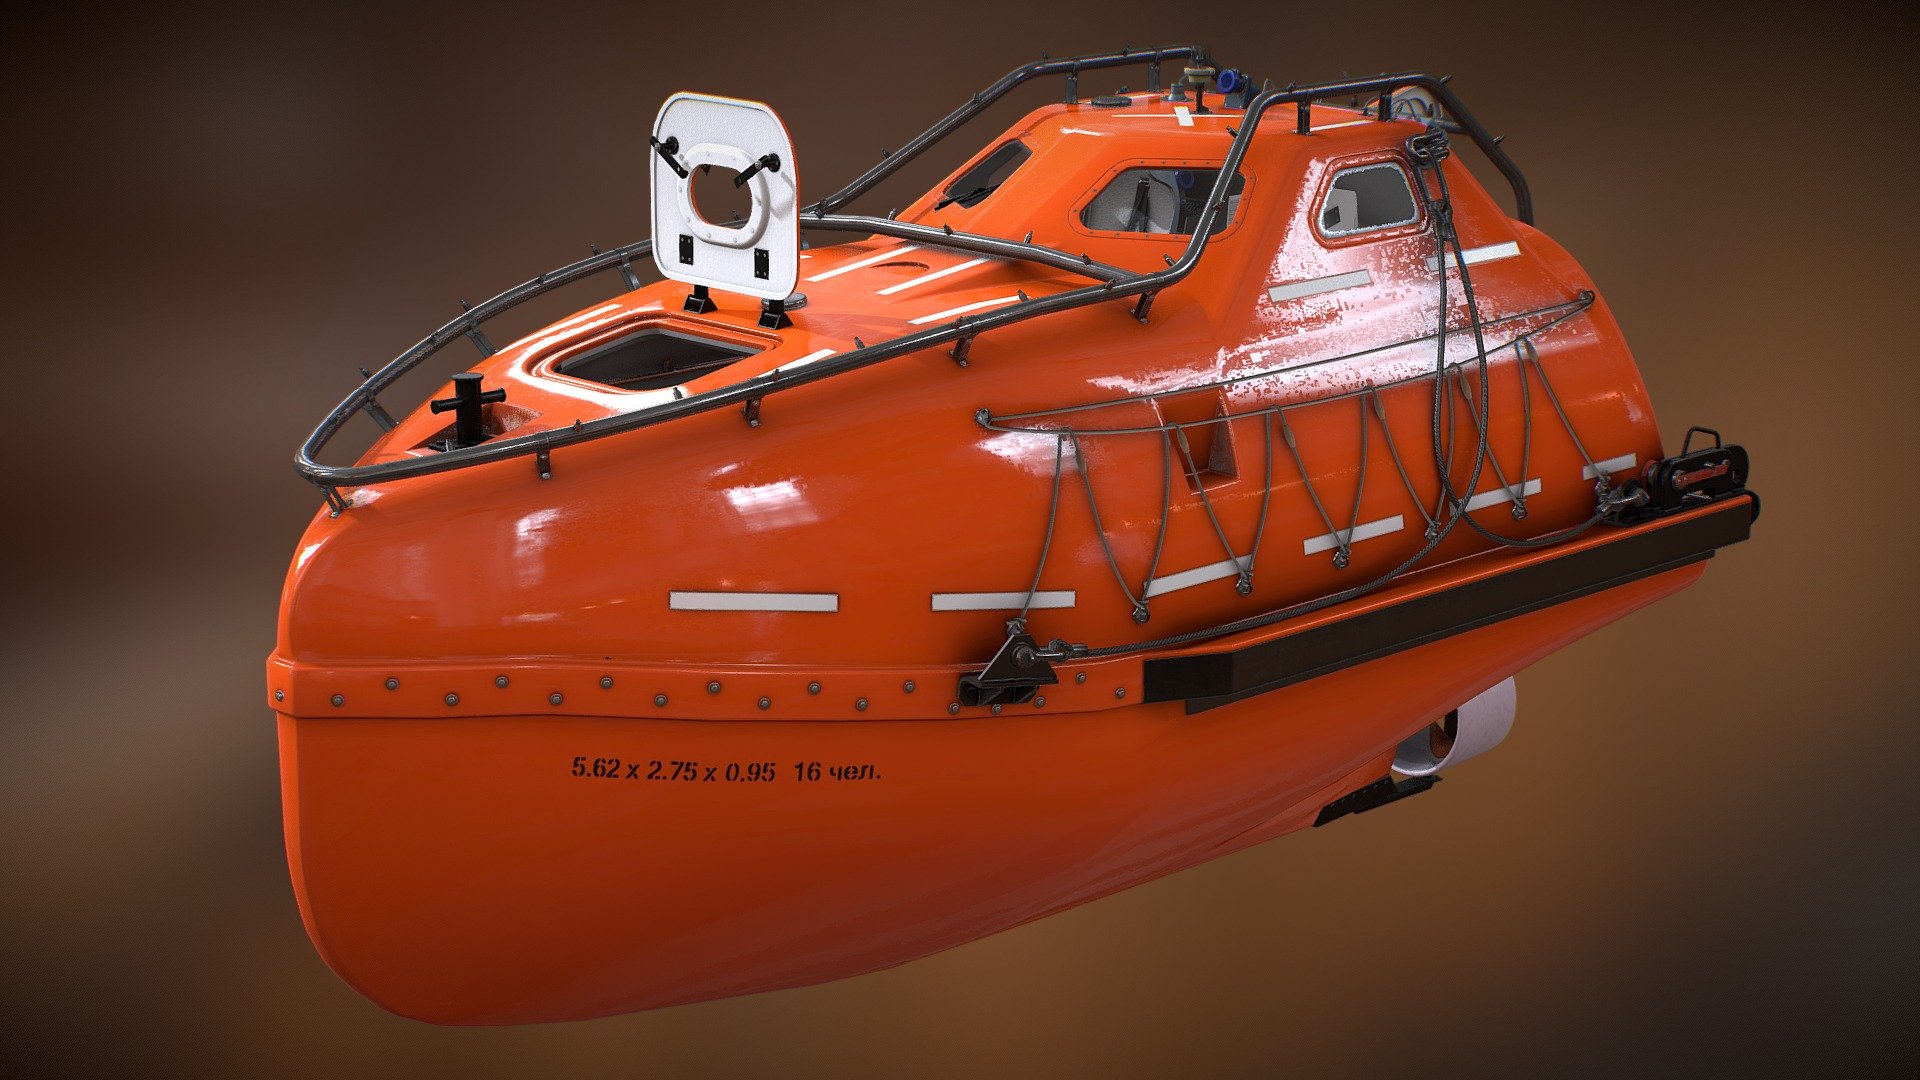 A rescue lifeboat is a boat rescue craft which is used to attend a vessel in distress, or its survivors, to rescue crew and passengers. It can be hand pulled, sail powered or powered by an engine. Lifeboats may be rigid, inflatable or rigid-inflatable combination-hulled vessels.
Next model https://skfb.ly/oppGQ - freefall lifeboat - 3D model by ShipSIM 3d model